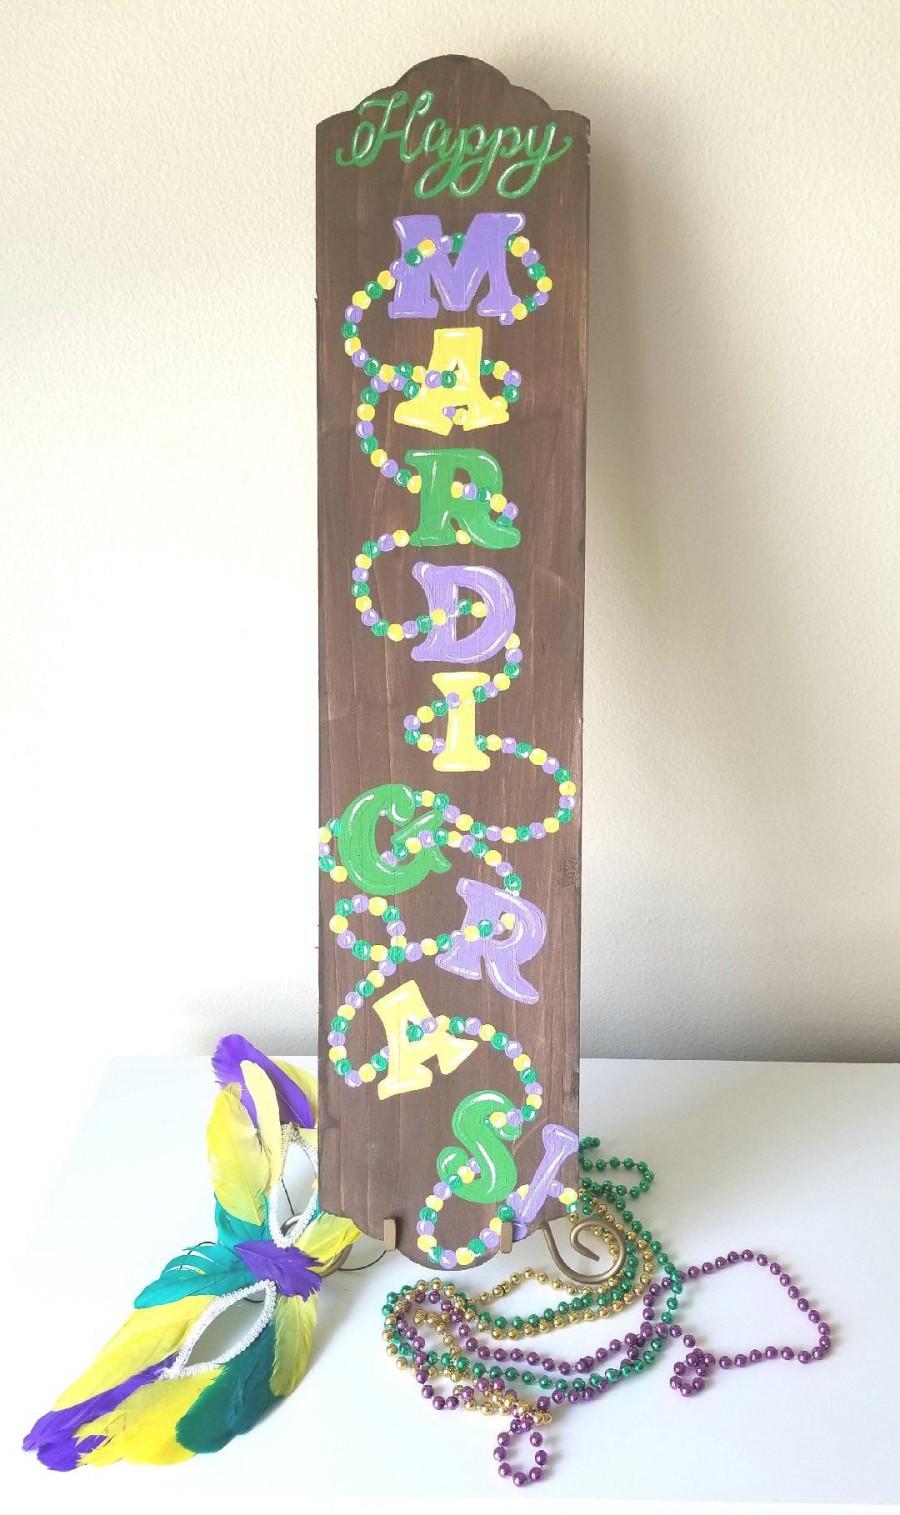 Mariage - Happy Mardi Gras hand painted wood sign indoor or outdoor decor mardi gras colors beads surround letters stand against wall or outside door